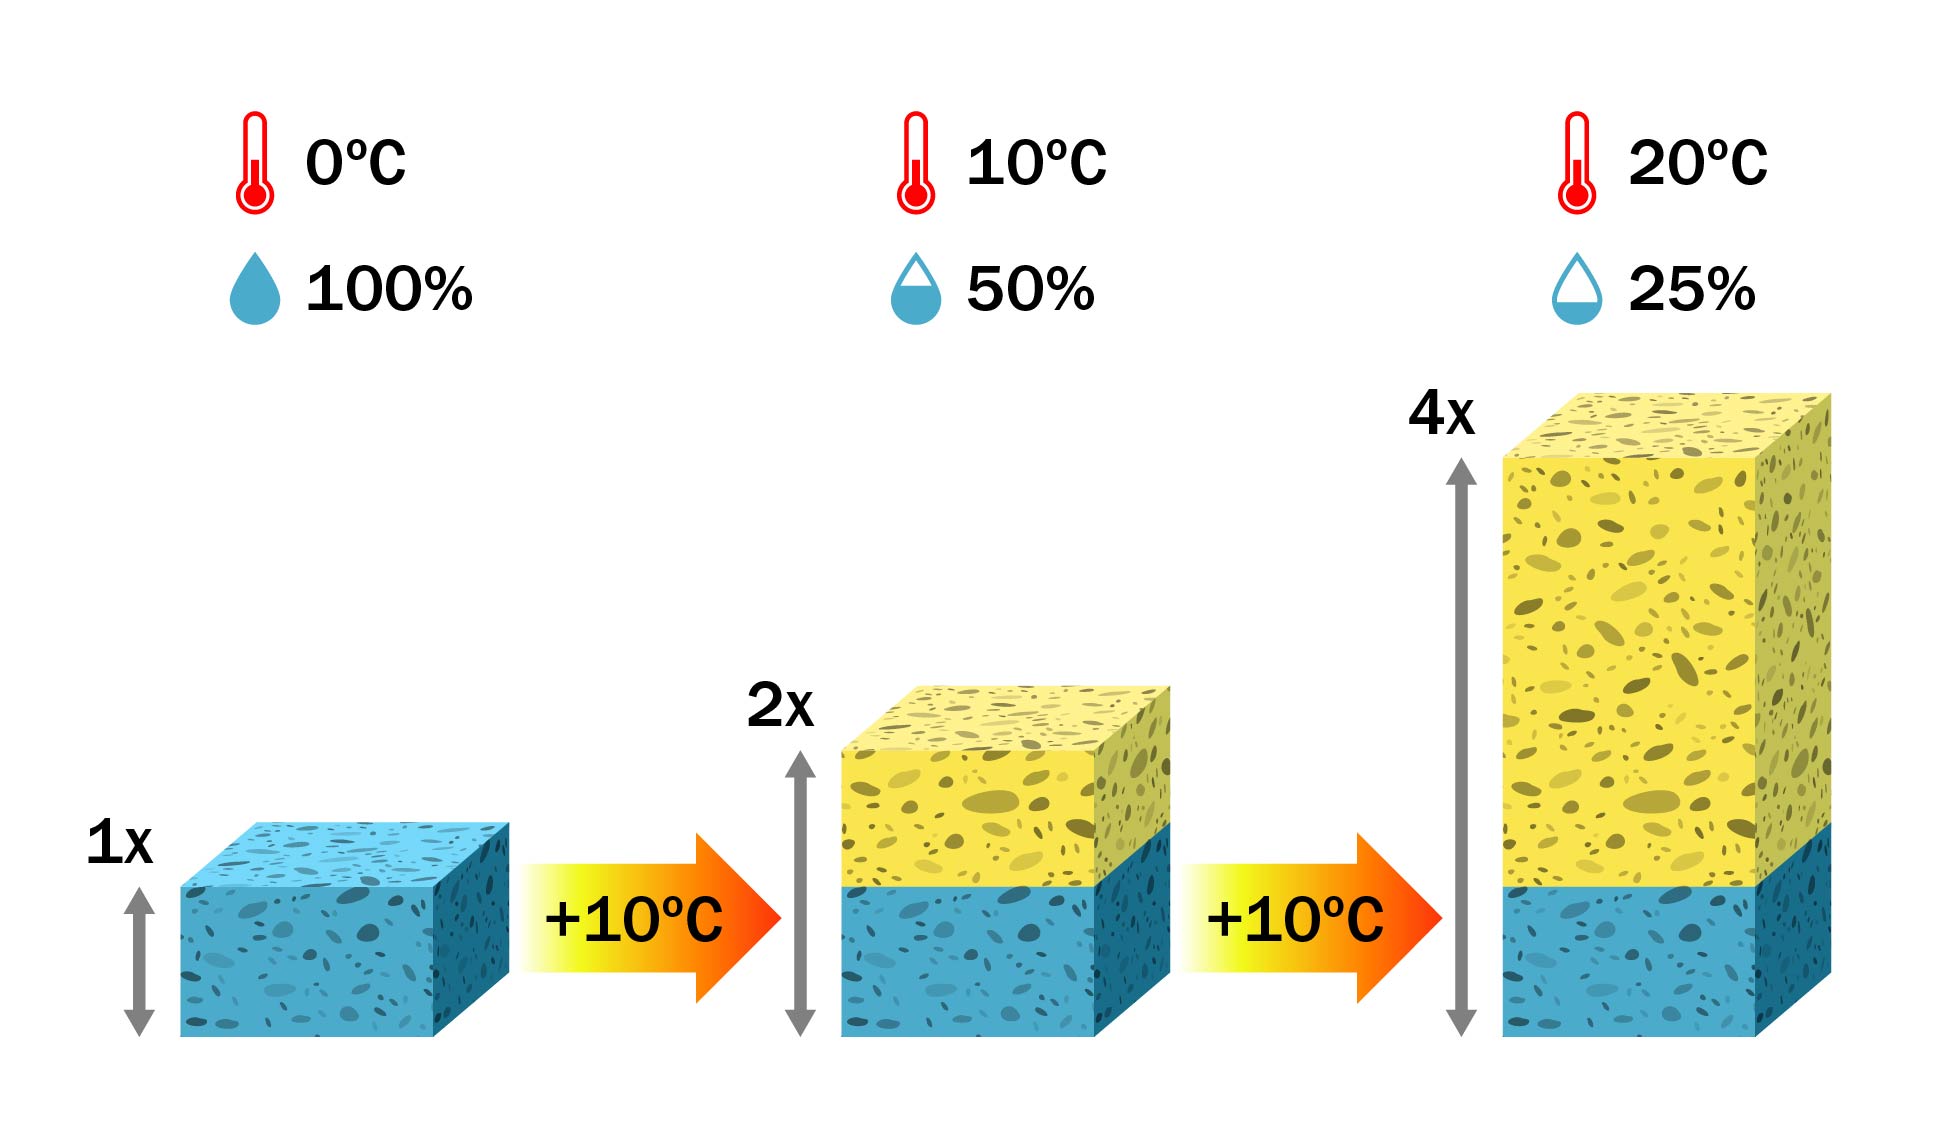 A series of sponges that absorb more moisture as the air temperature increases. Air at 0°C and 100% relative humidity holds the same amount of water as air at 10°C and 50% relative humidity, and as air at 20°C and 25% relative humidity. Air at 10°C has twice the water holding capacity of air at 0°C. Air at 20°C has four times the water holding capacity of air at 0°C.